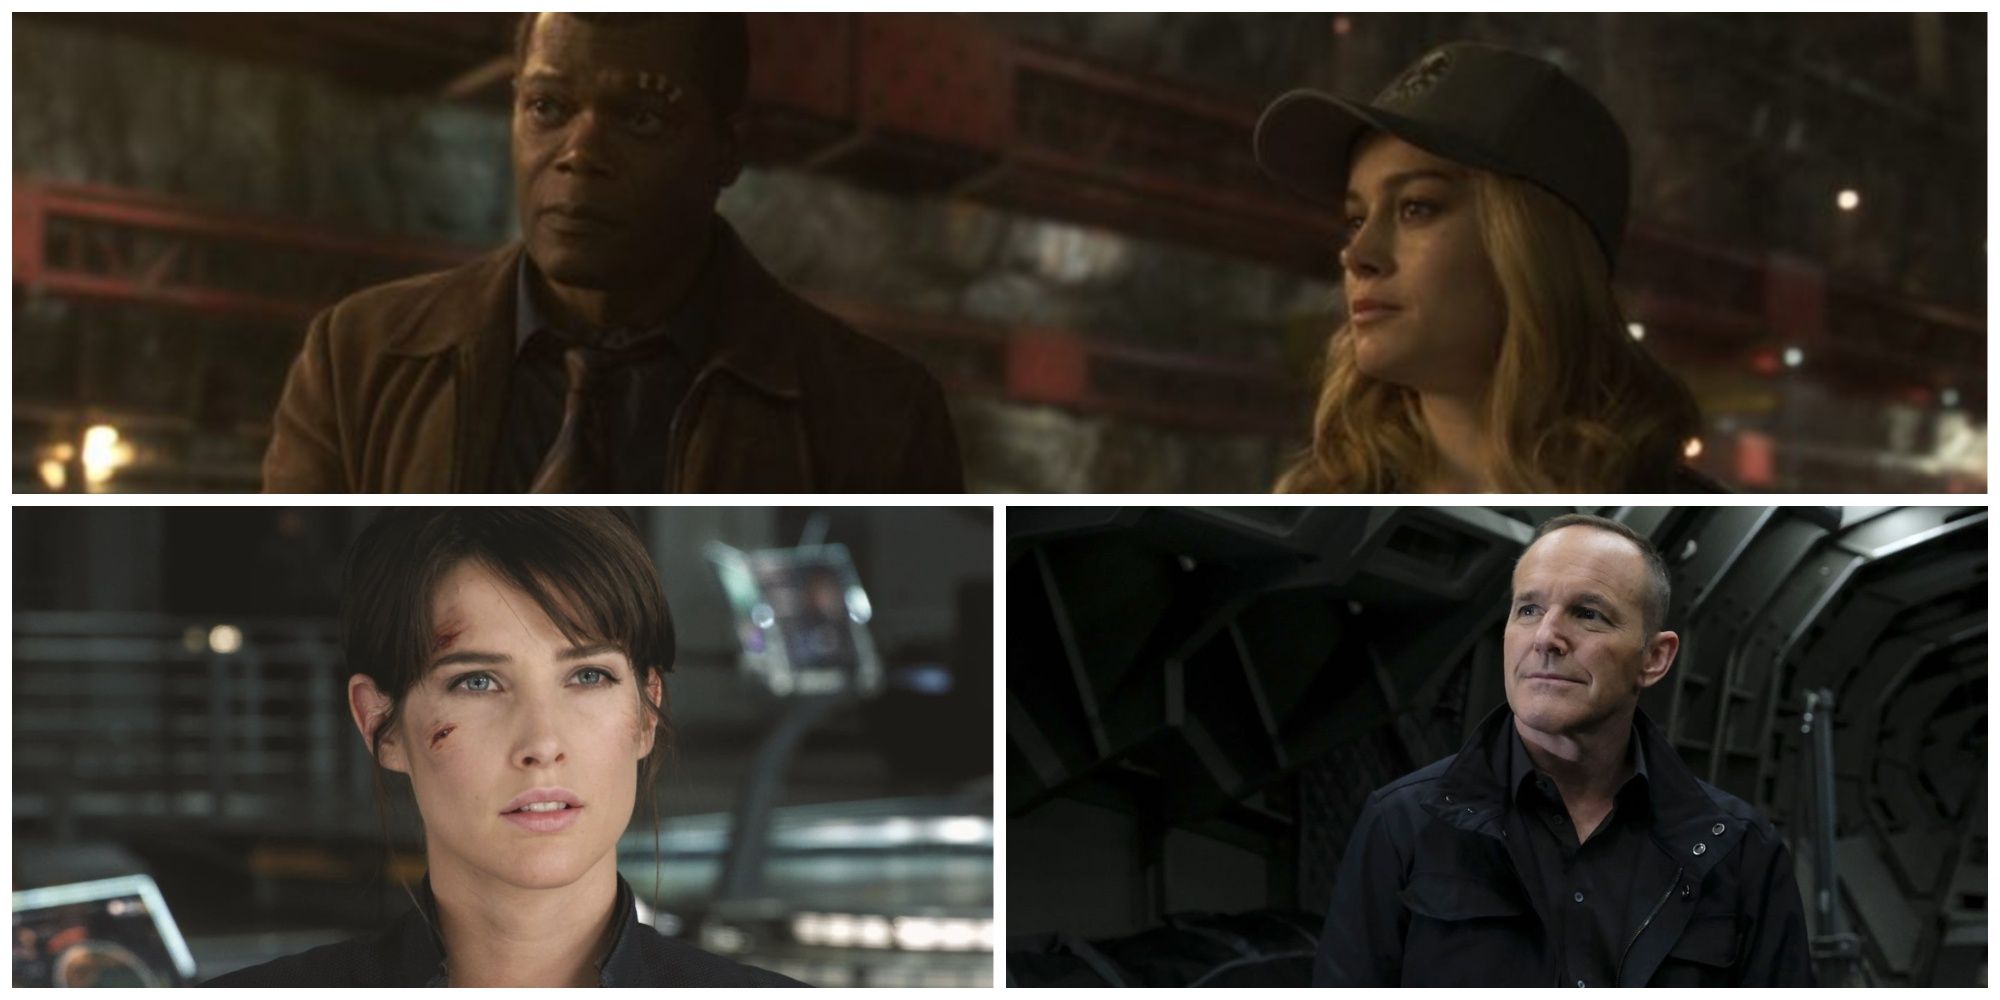 Samuel L. Jackson as Nick Fury. Brie Larson as Captain Marvel. Cobie Smulders as Maria Hill. Clark Gregg as Phil Coulson.